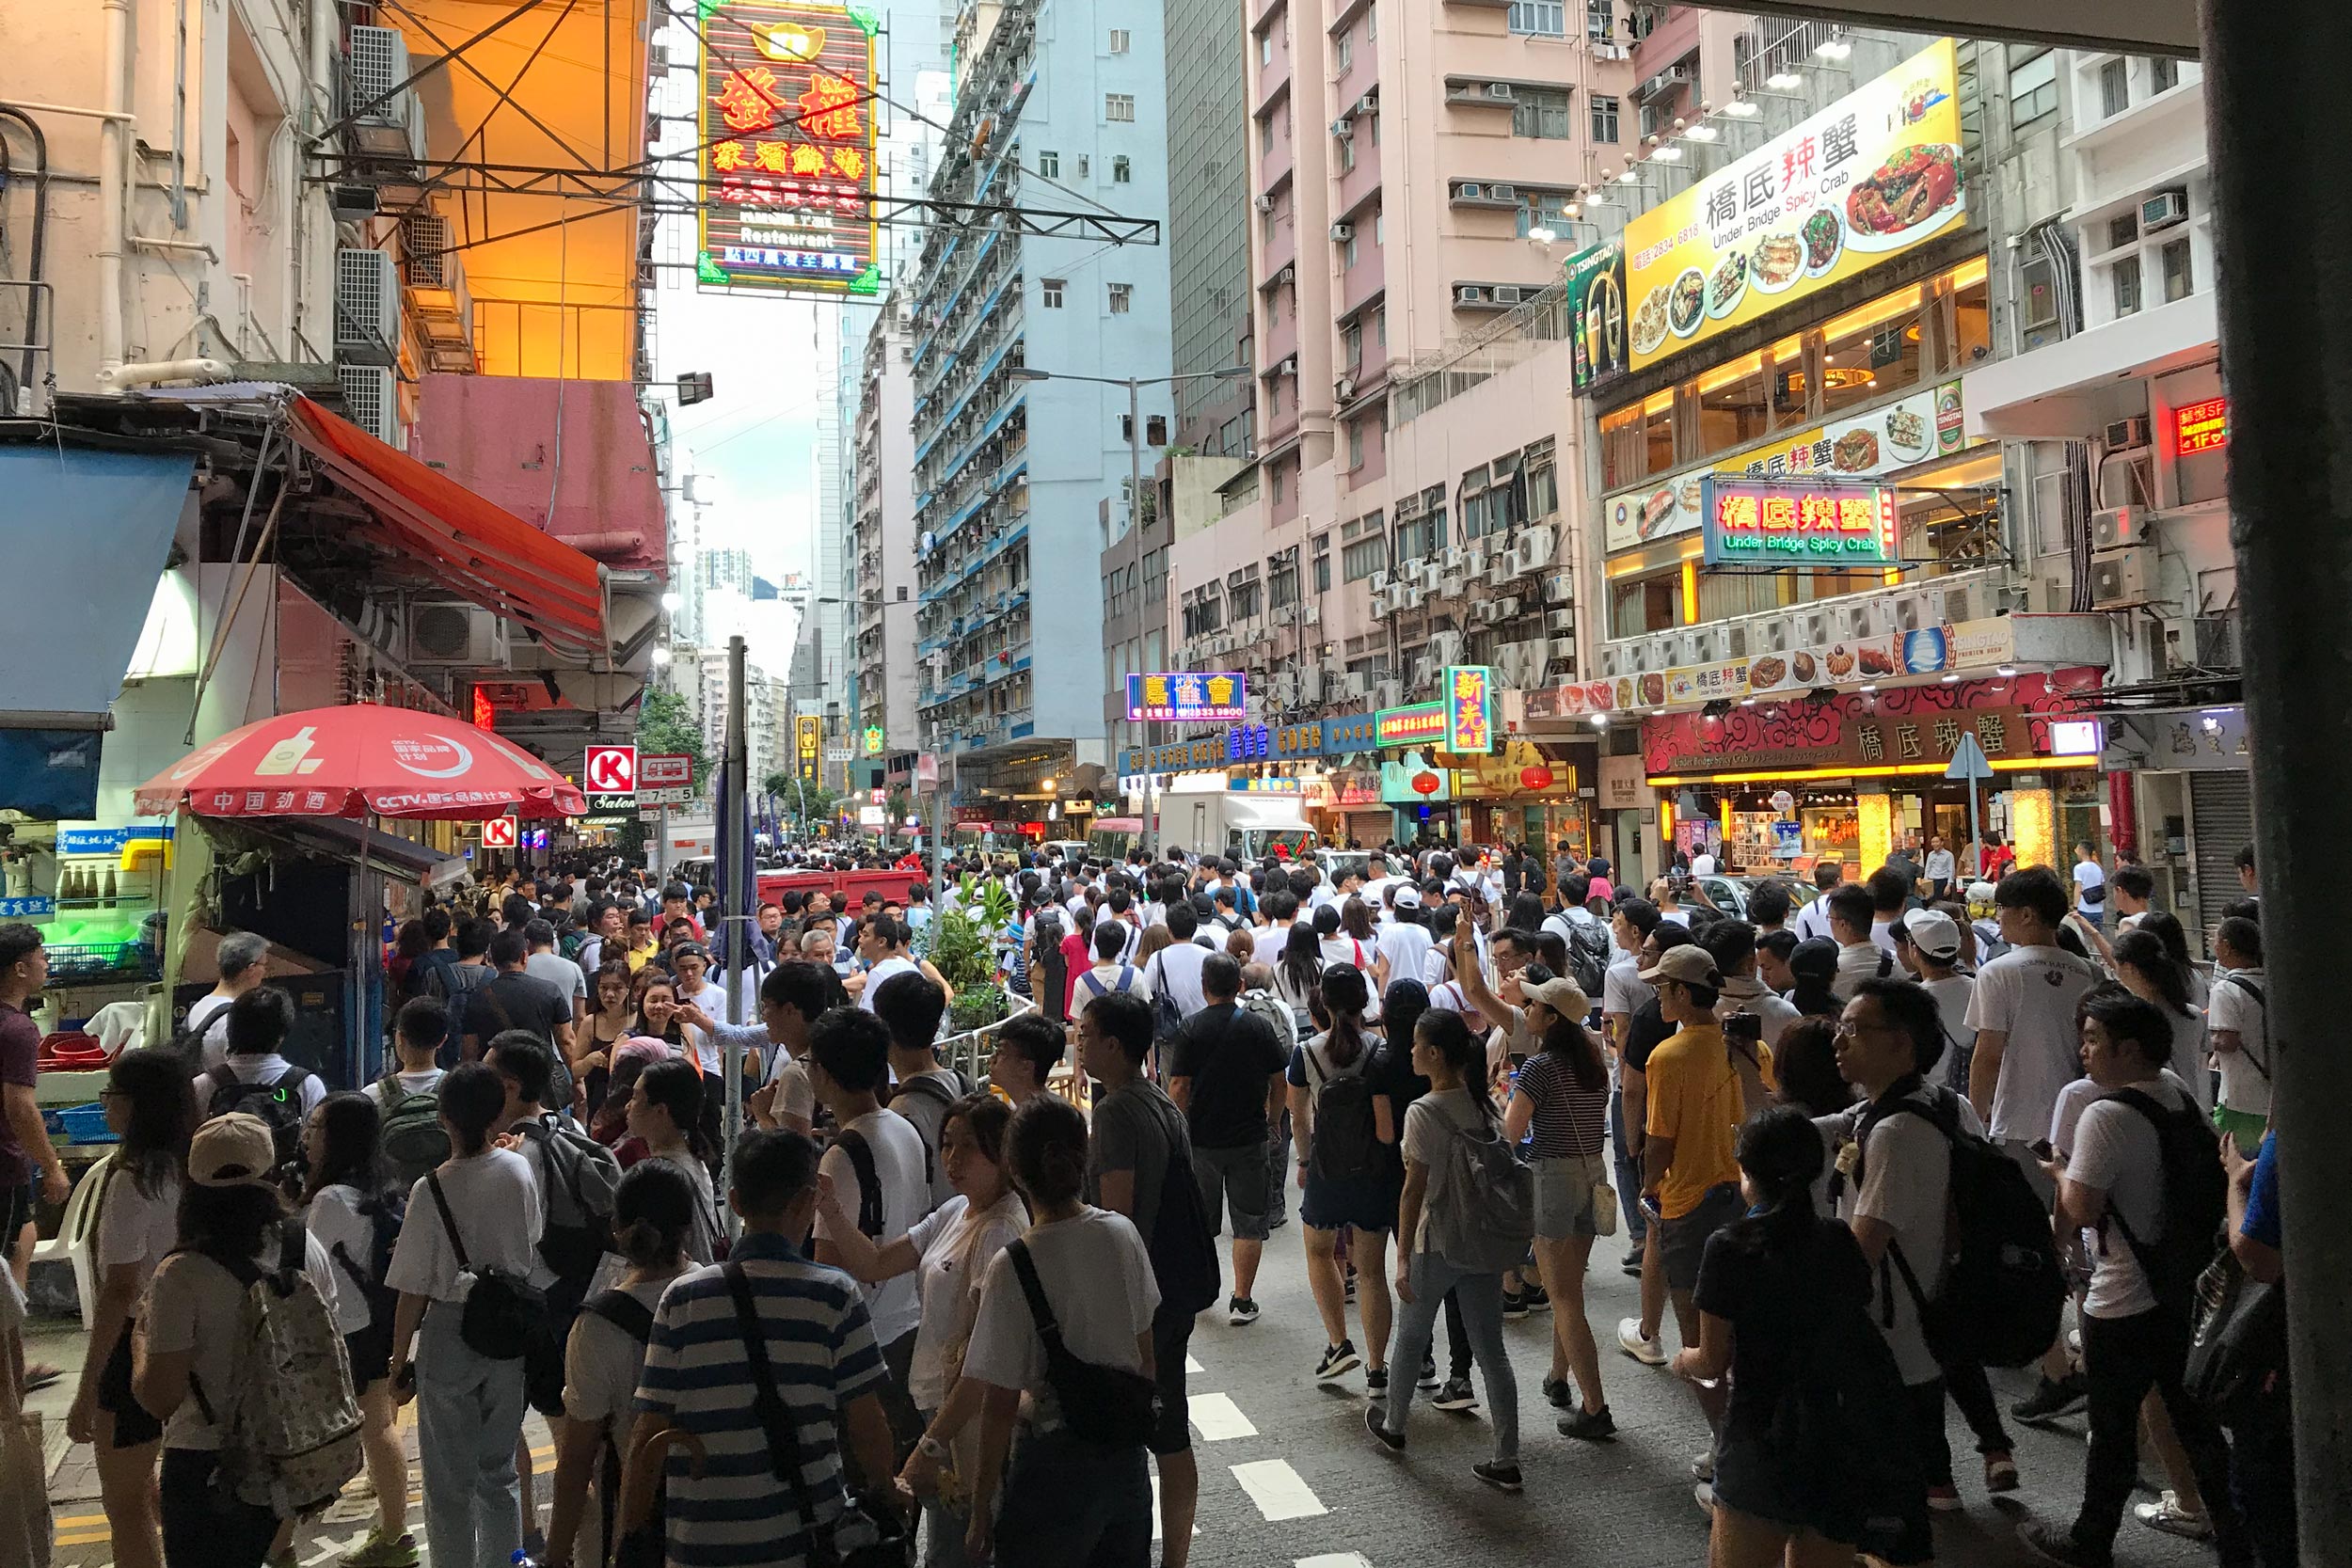 Hong Kong  streets filled with people